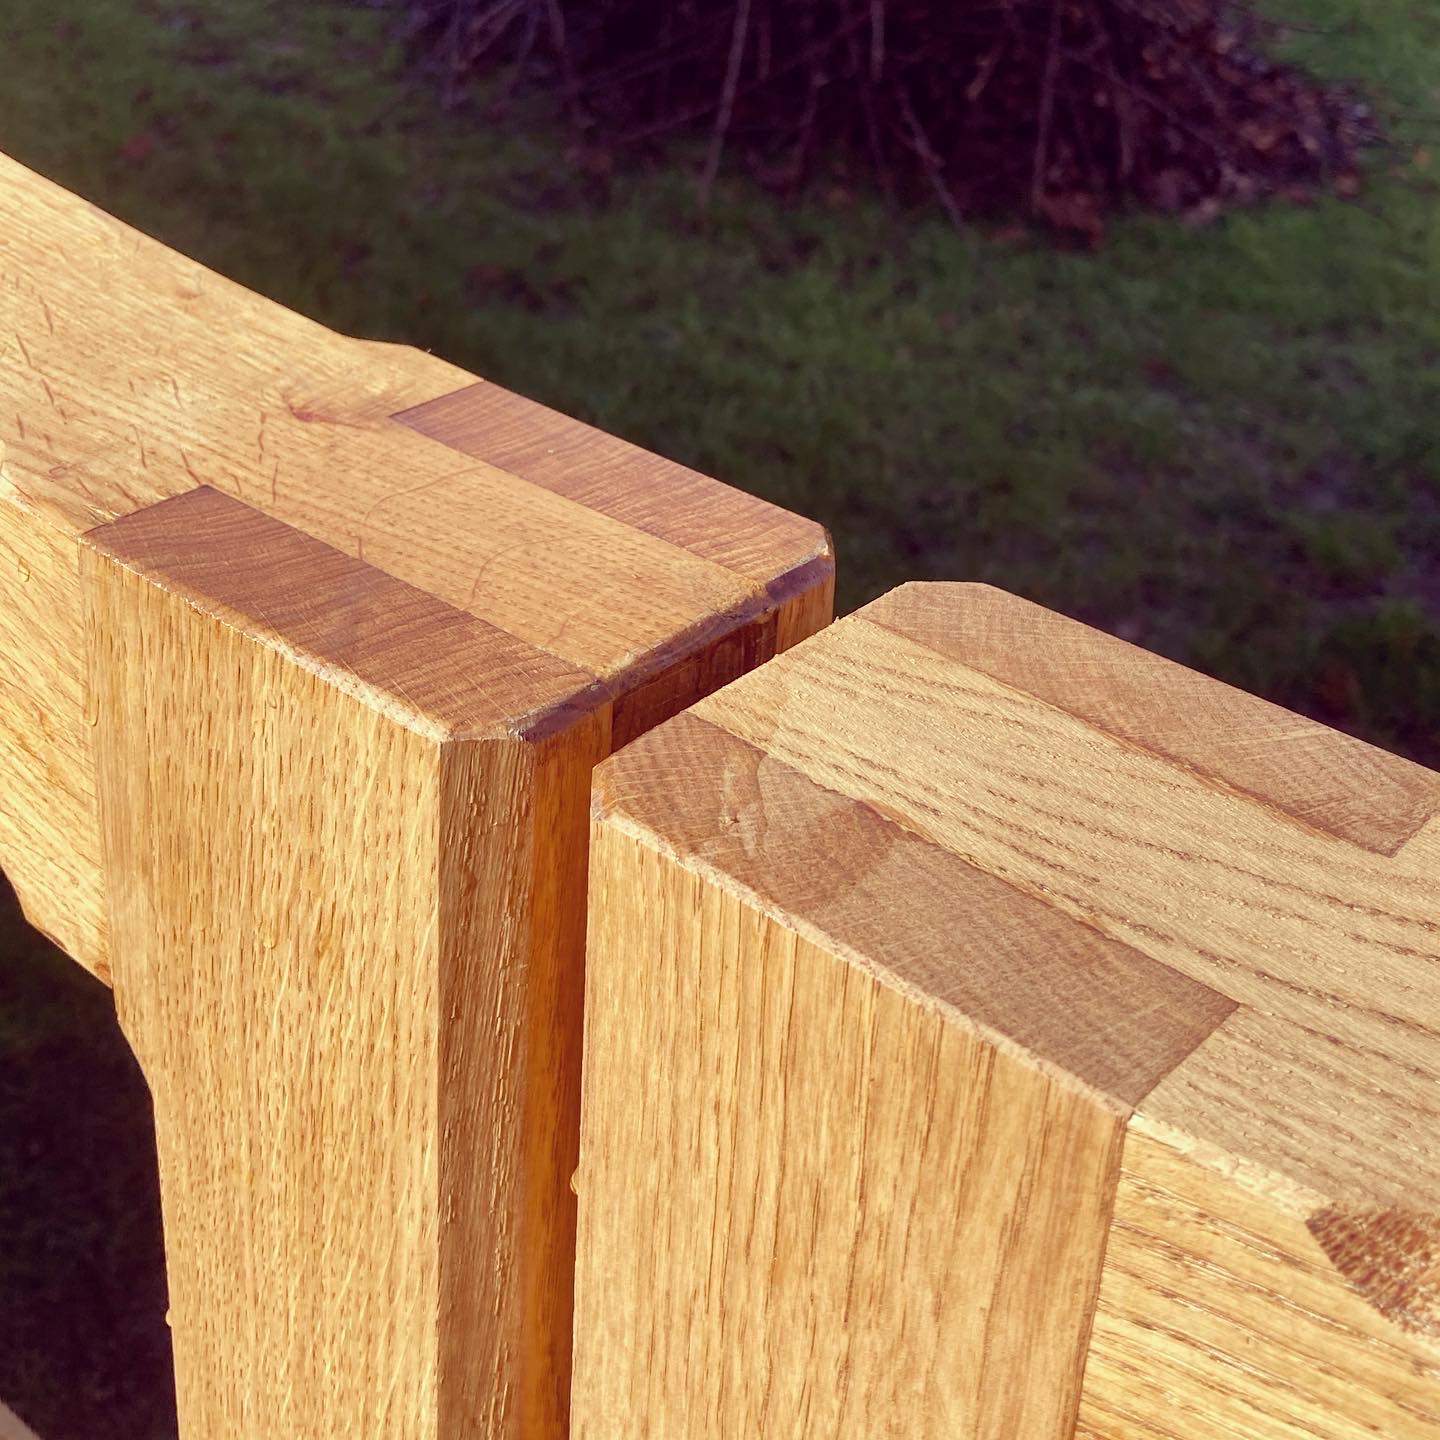 Bridle joint detail